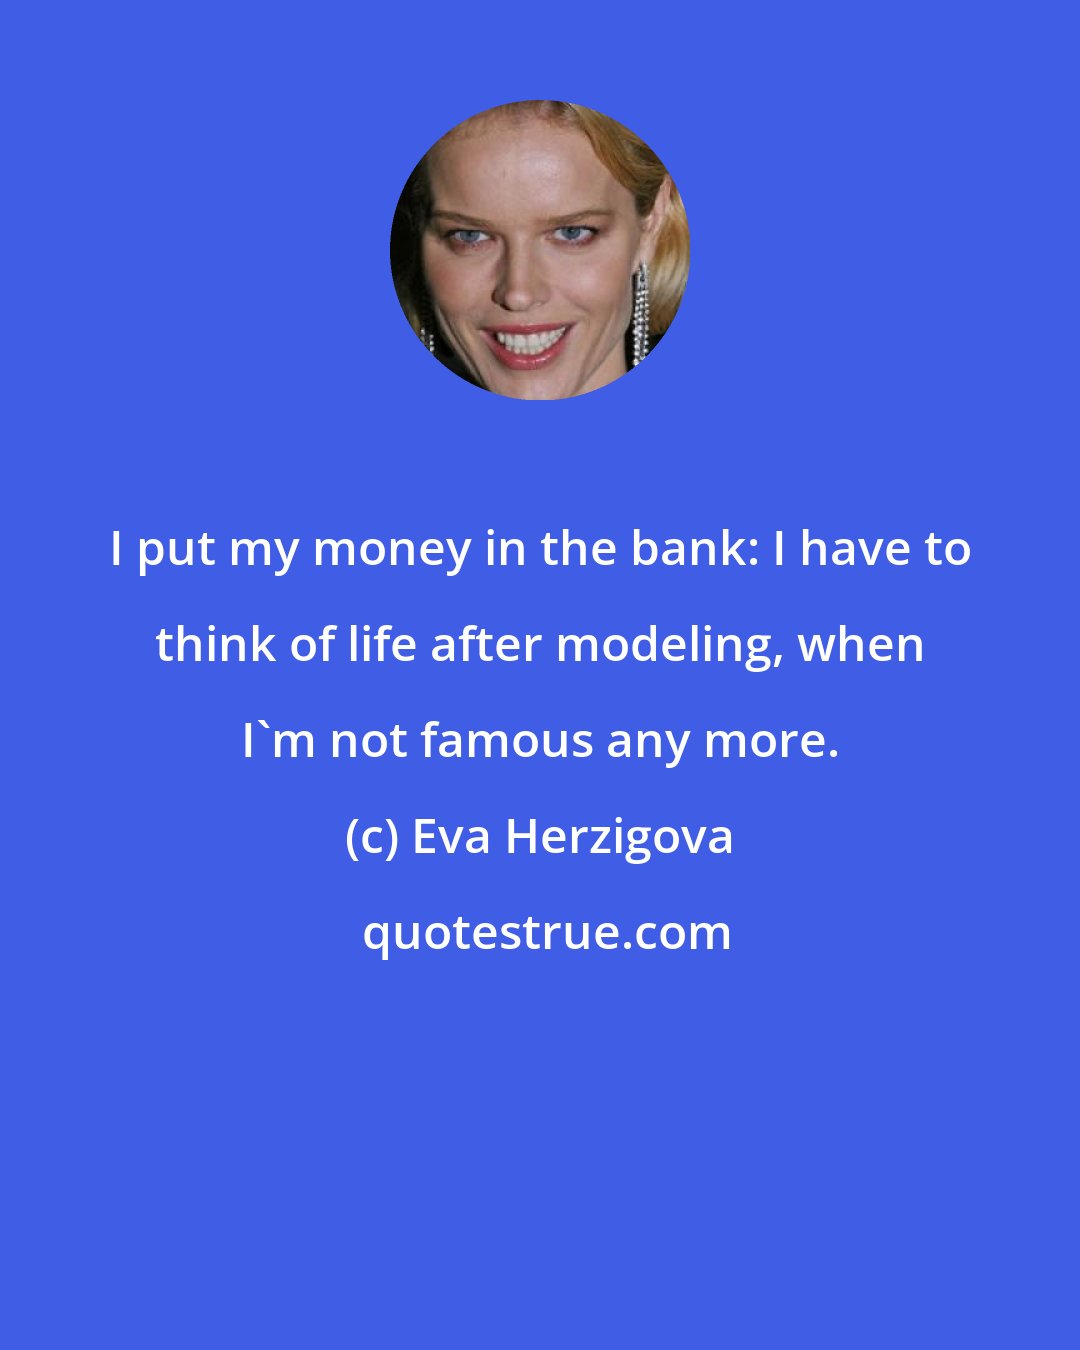 Eva Herzigova: I put my money in the bank: I have to think of life after modeling, when I'm not famous any more.